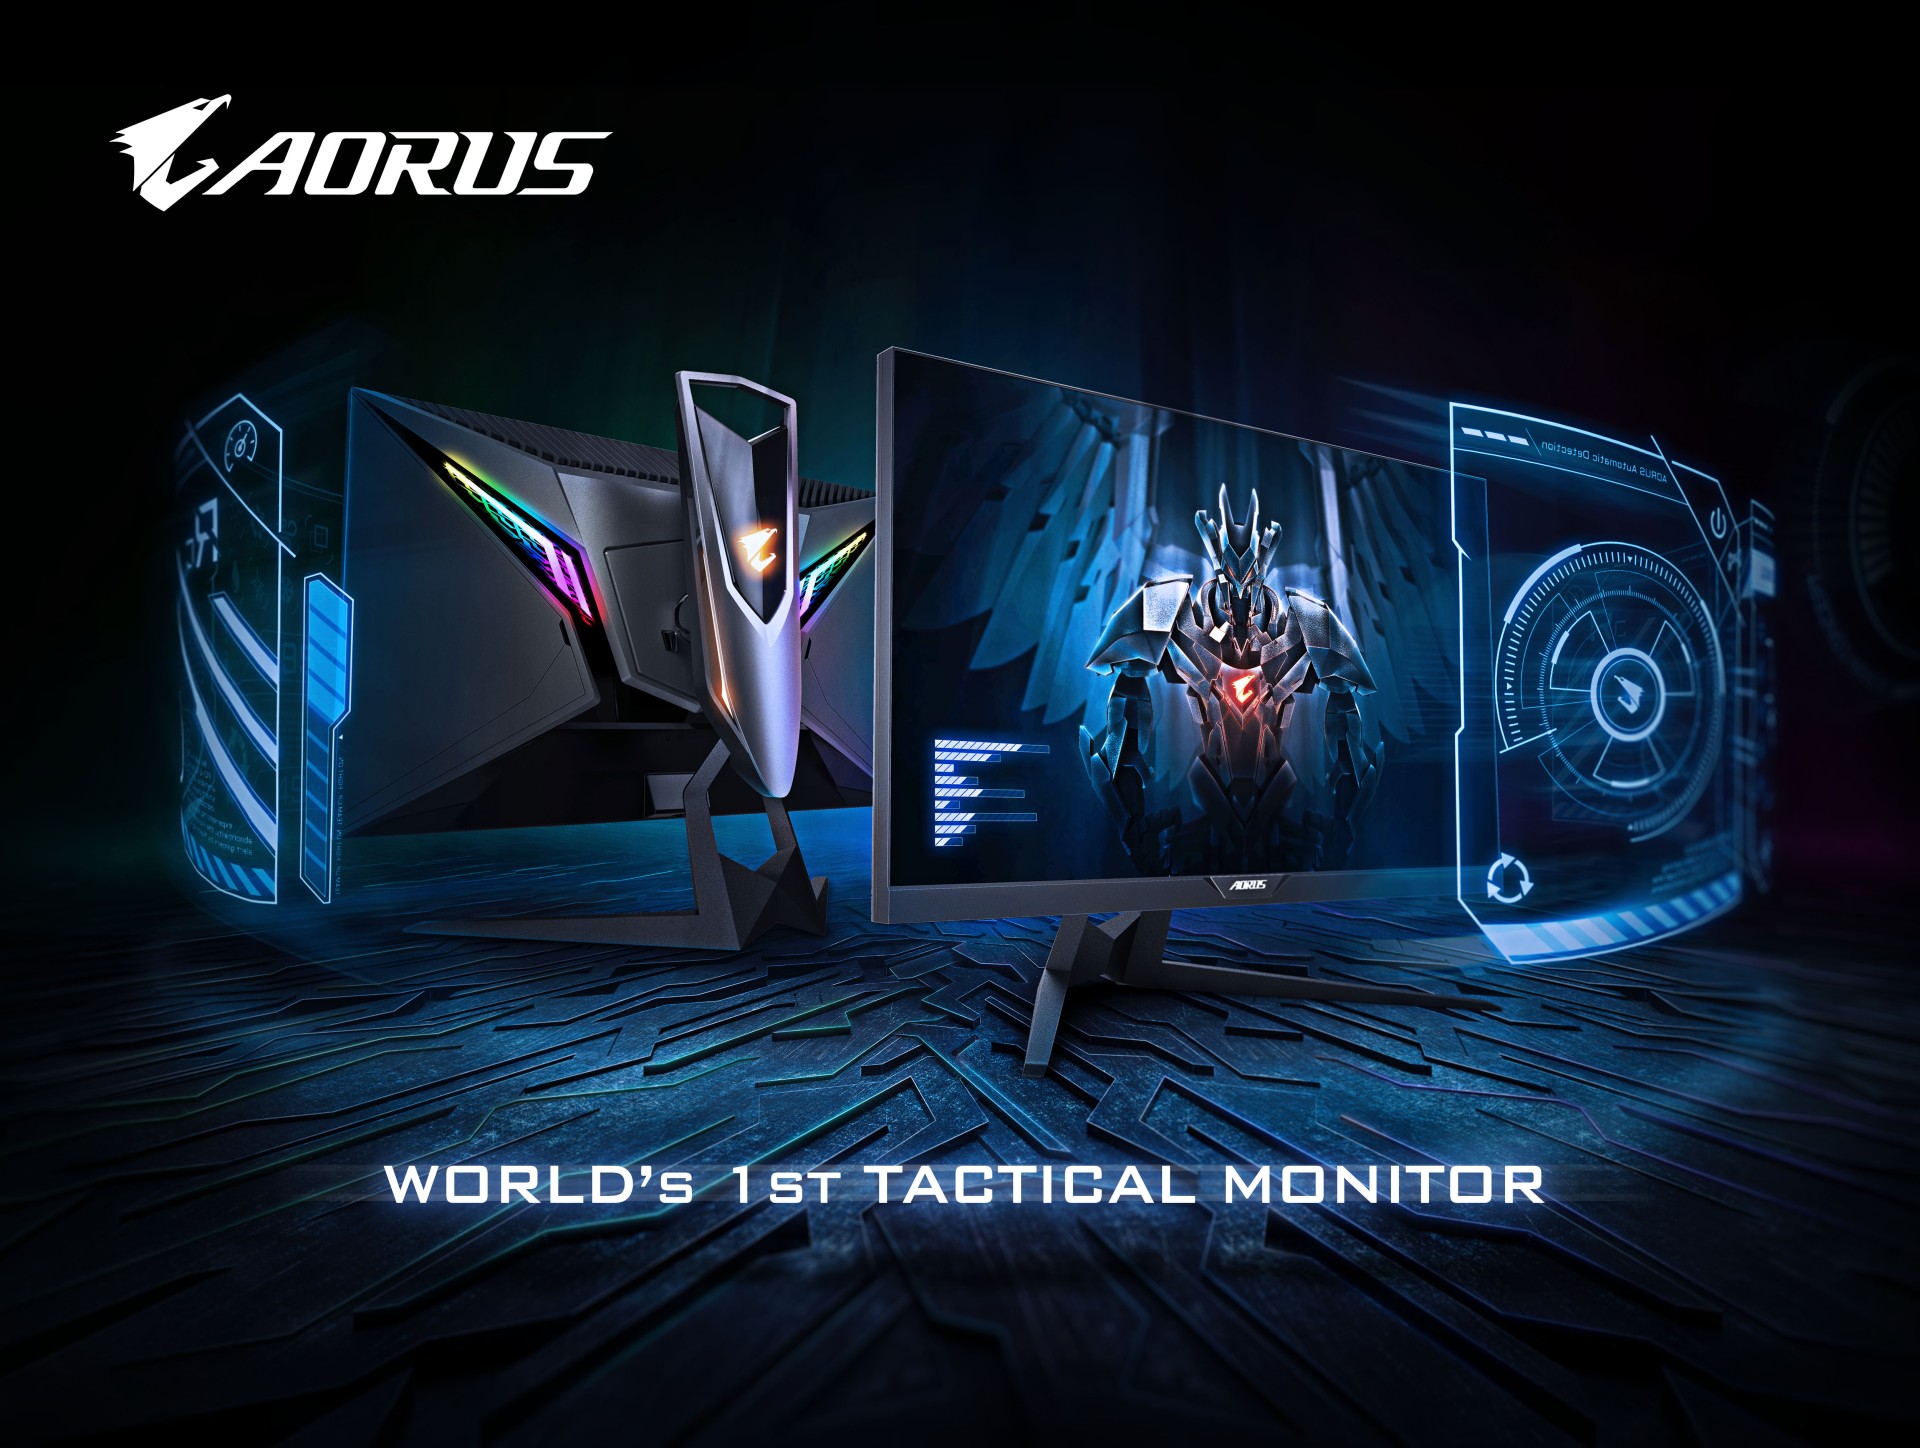 The Gigabyte Aorus CV27F Is The ‘World’s First Tactical Gaming Monitor’